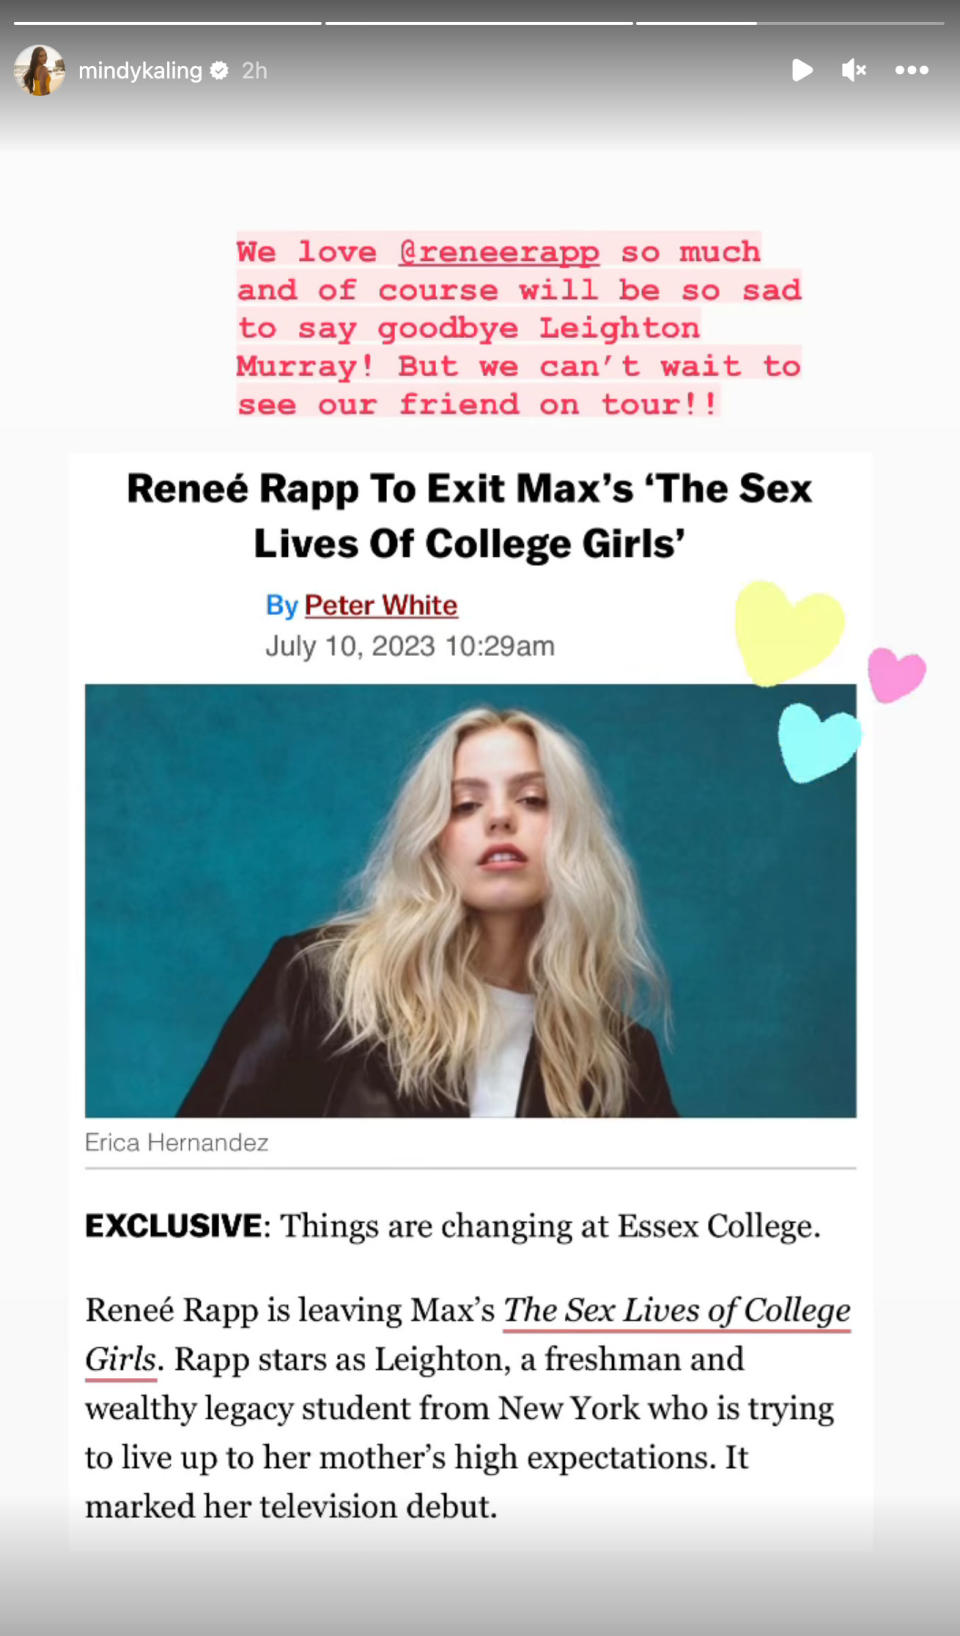 Mindy Kaling's Instagram Stories post on Reneé Rapp exiting 'The Sex Lives of College Girls'